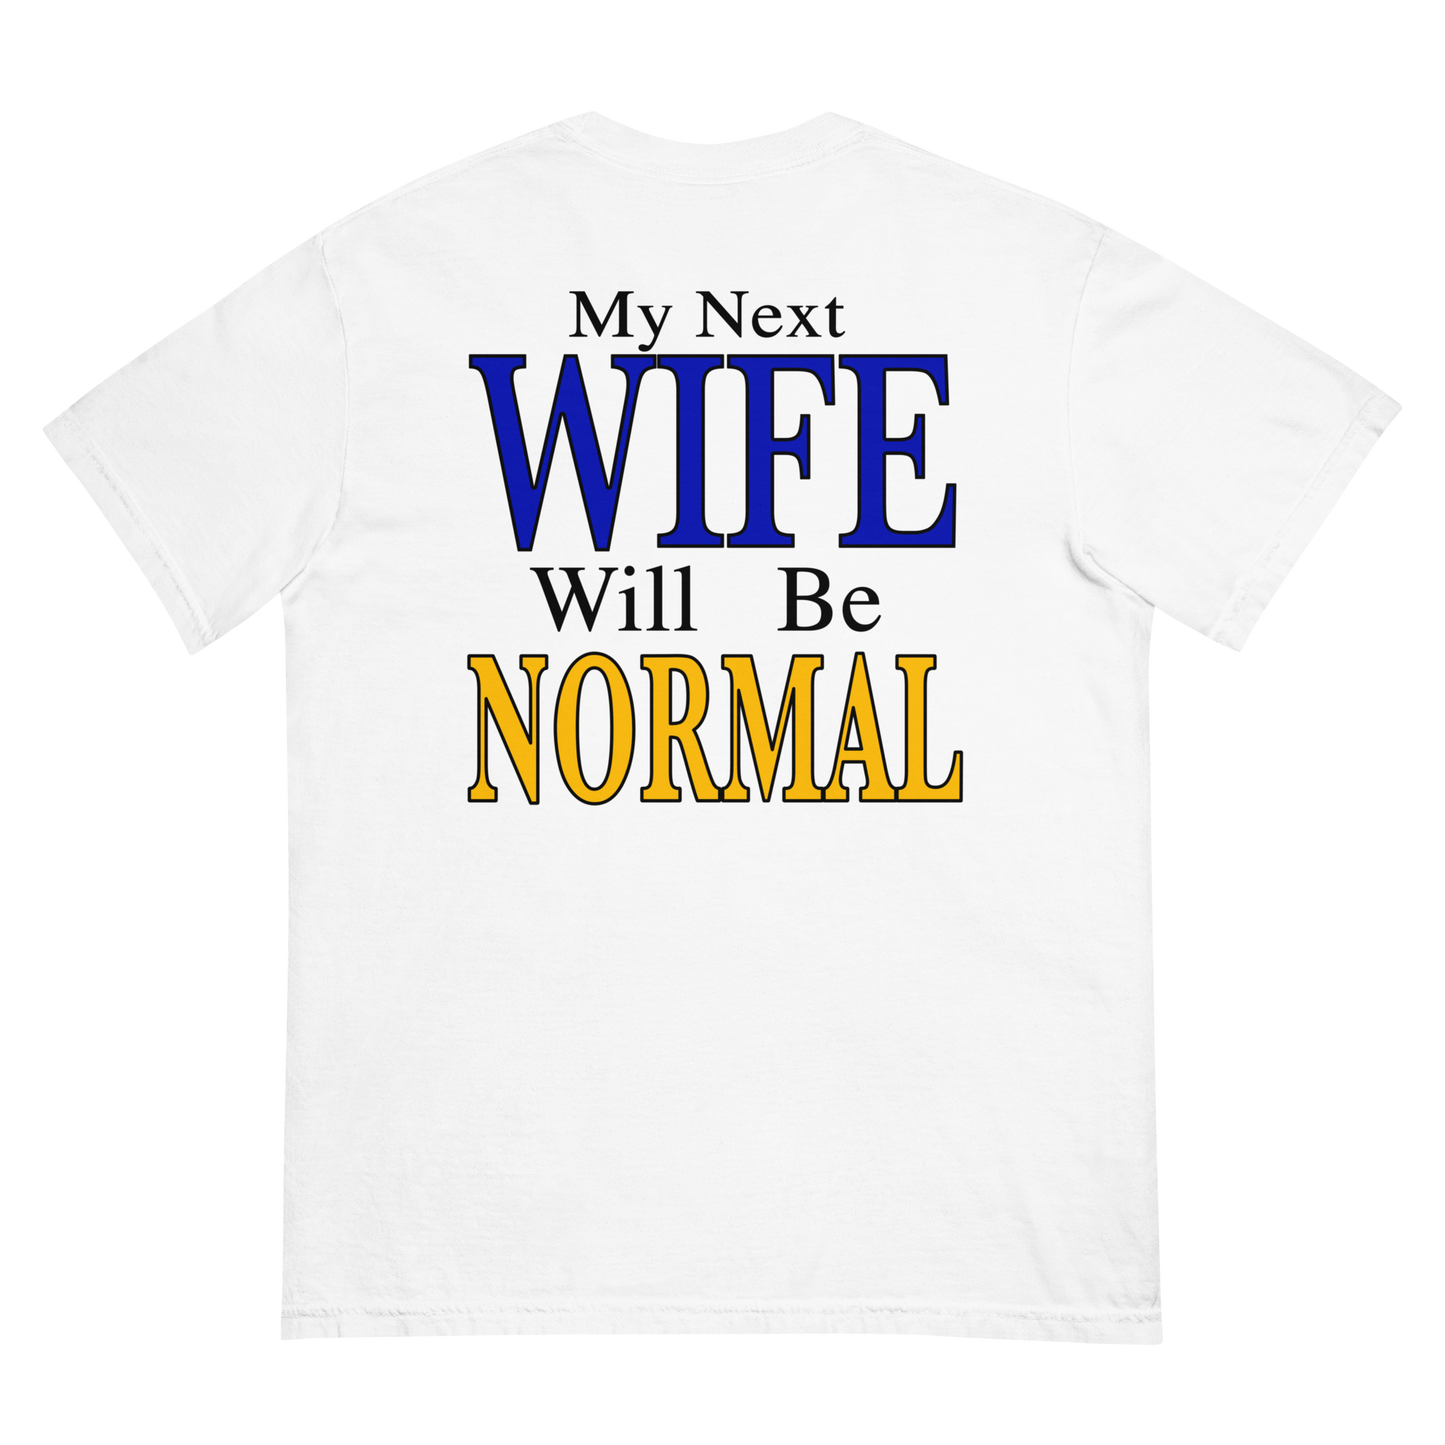 My Next Wife Will Be Normal.